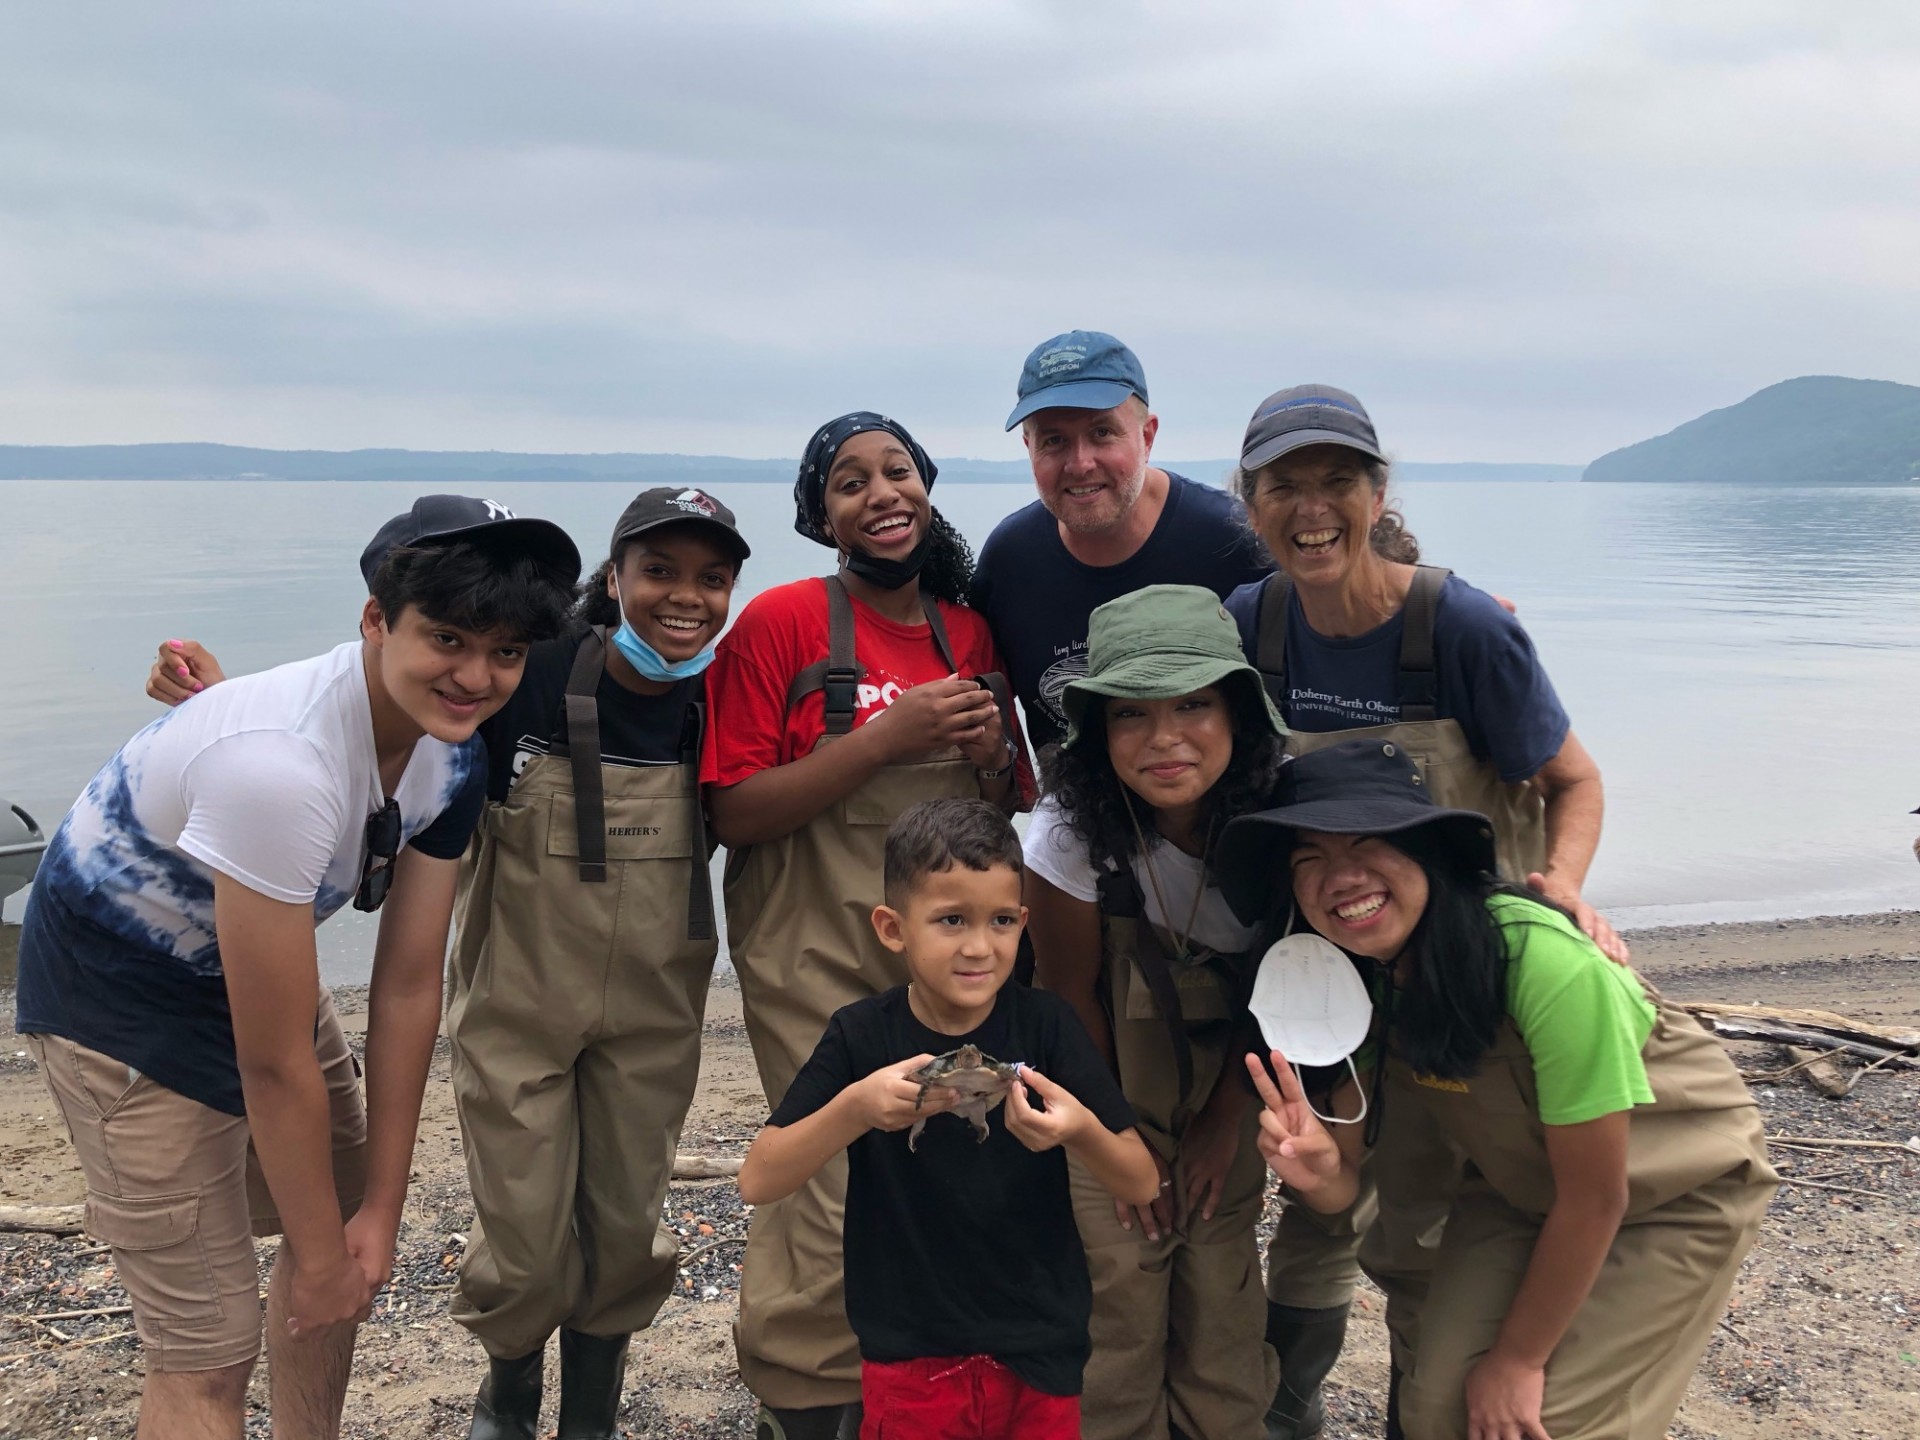 Next Generation of Hudson River Educators 2021 with community member Moses Jr. (center) holding a softshell turtle that the group named Moses III in his honor. Credit: Moses Sr.